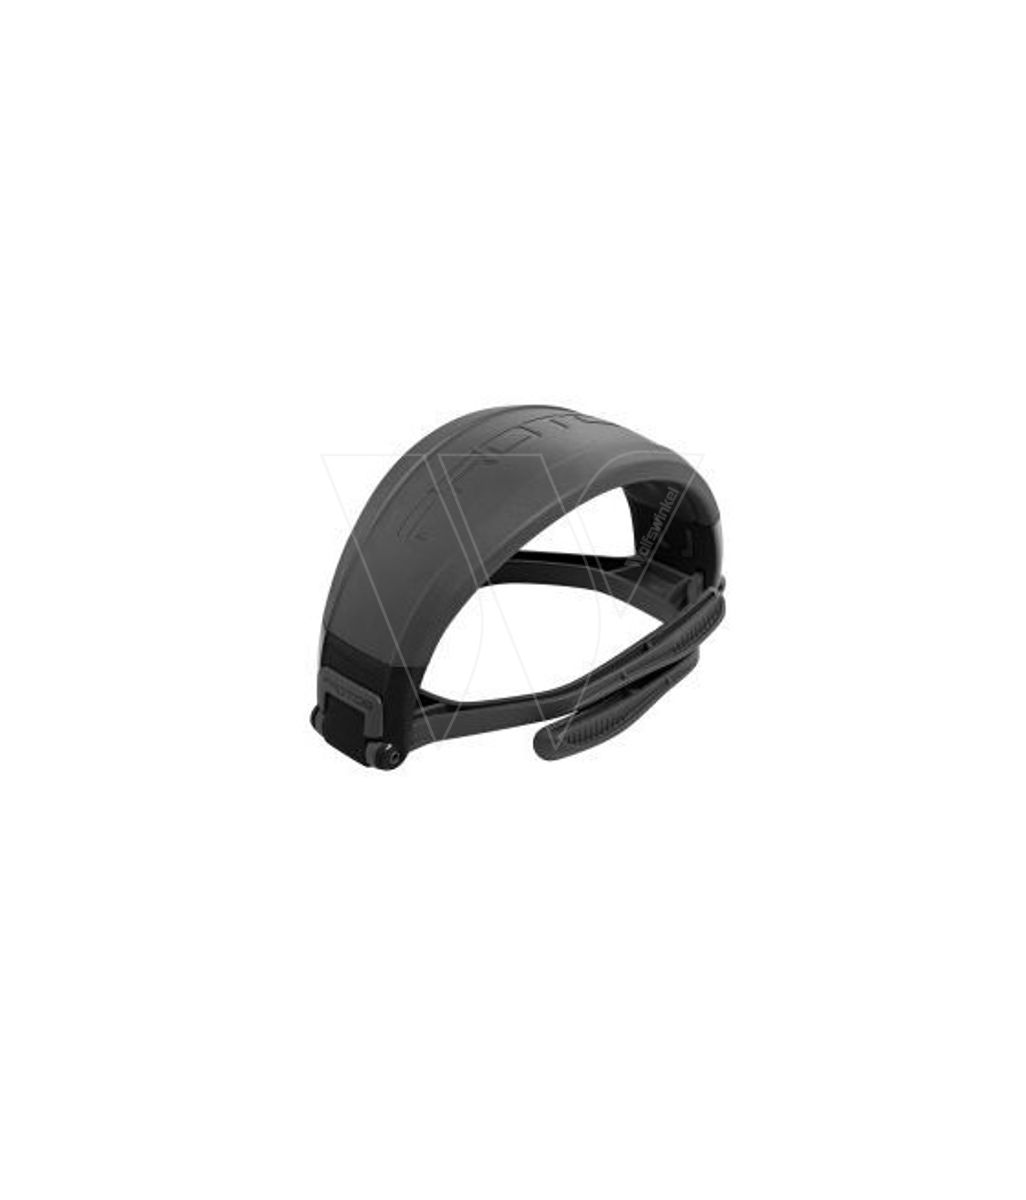 Protos headset without hearing ber. black